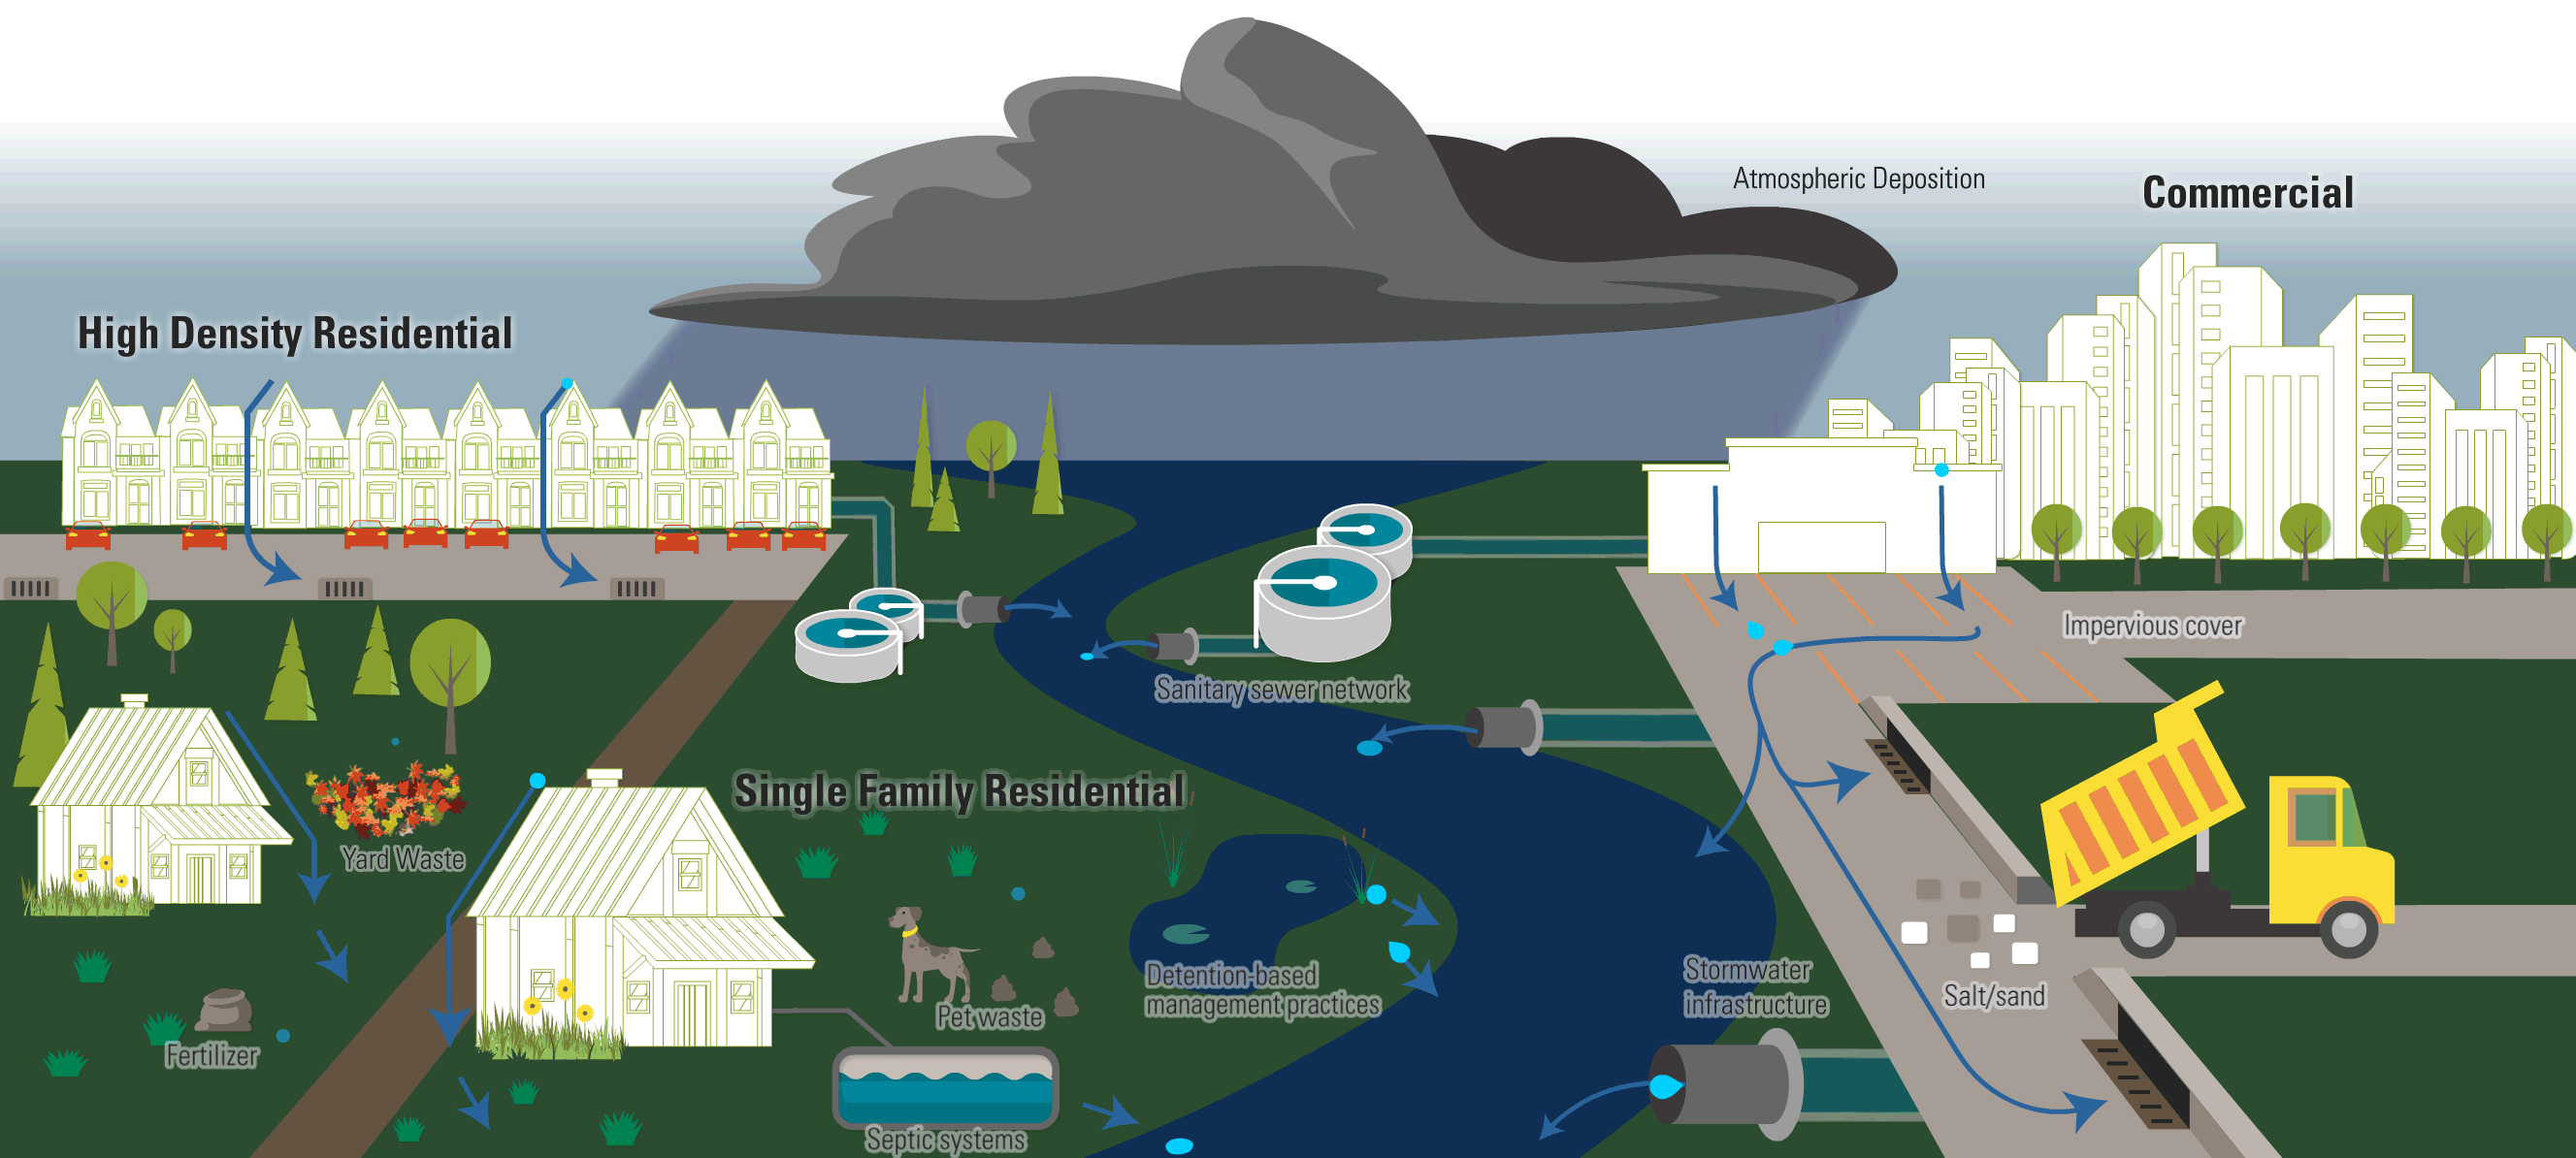 This animated illustrations shows sources of water run off and water source contamination.